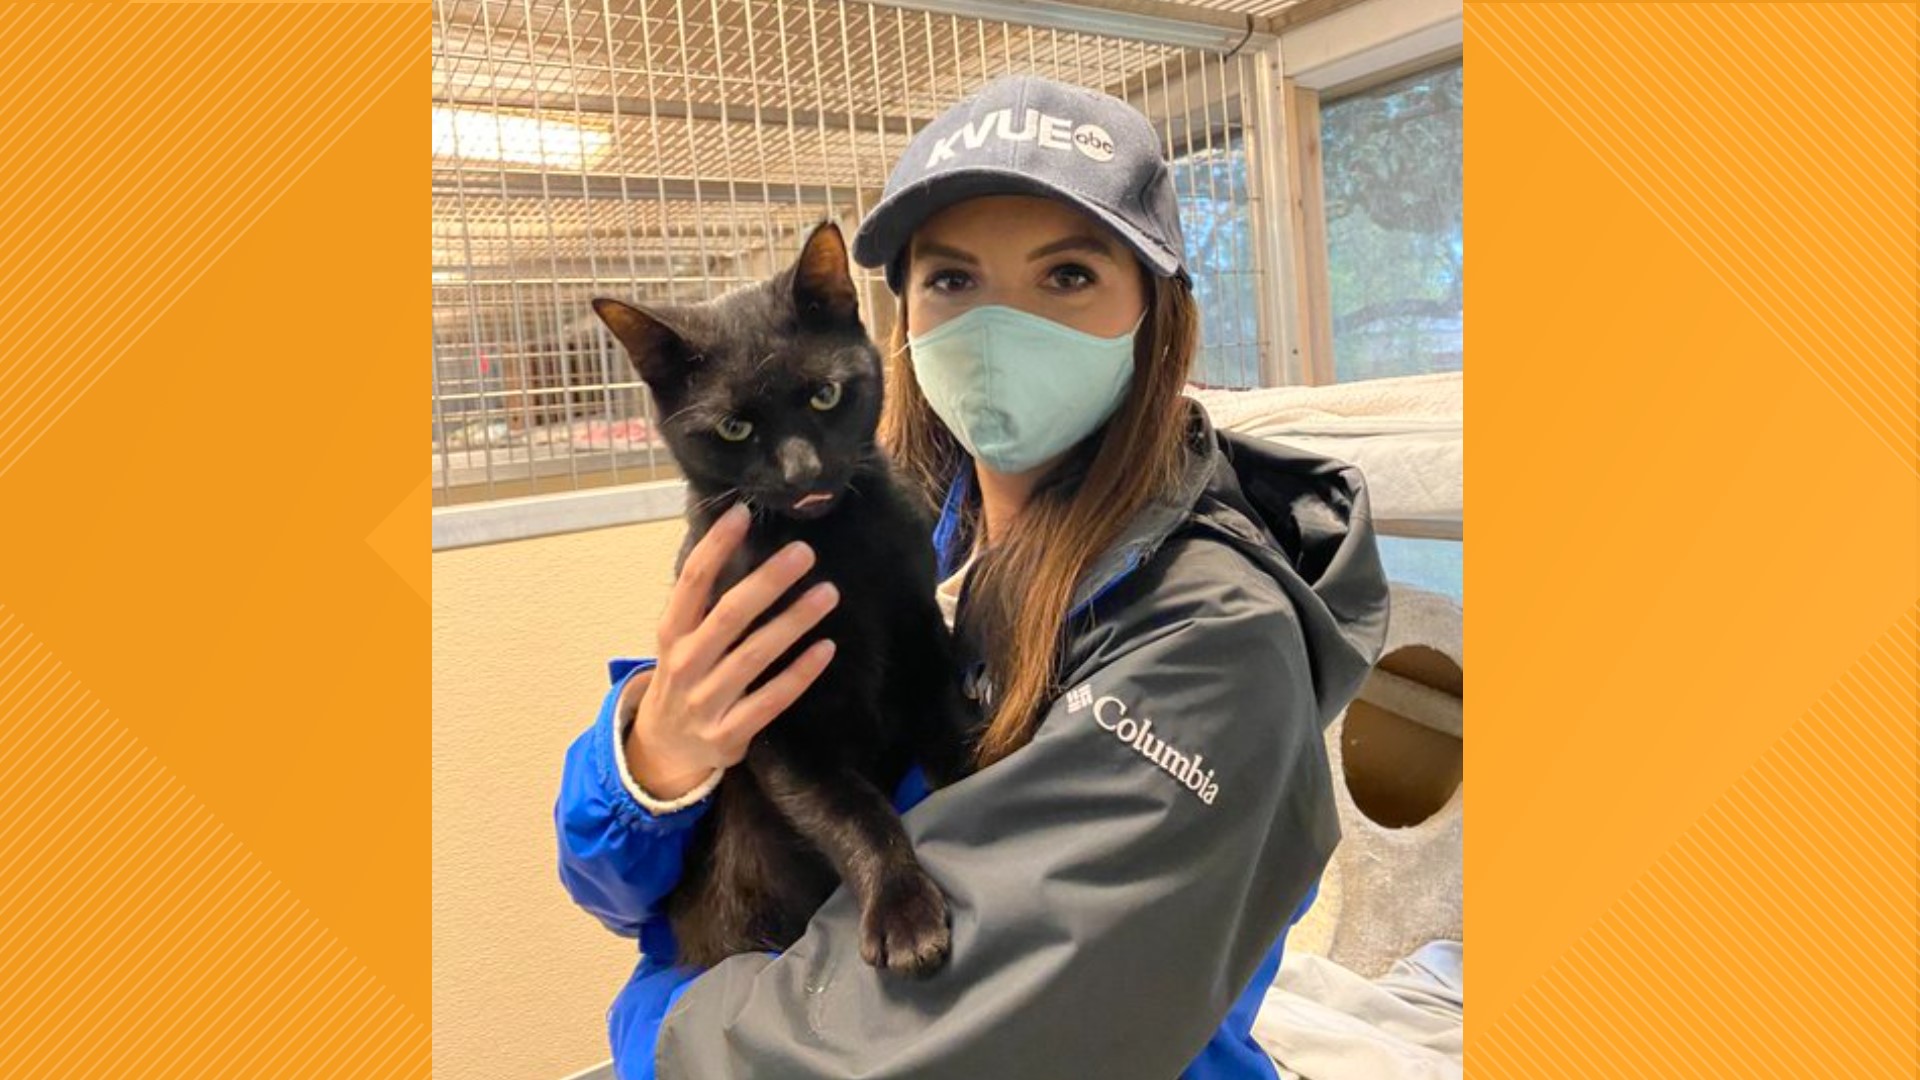 You can find Salem at the Texas Humane Heroes Leander Adoption Center, but you better hurry because he might just disappear!